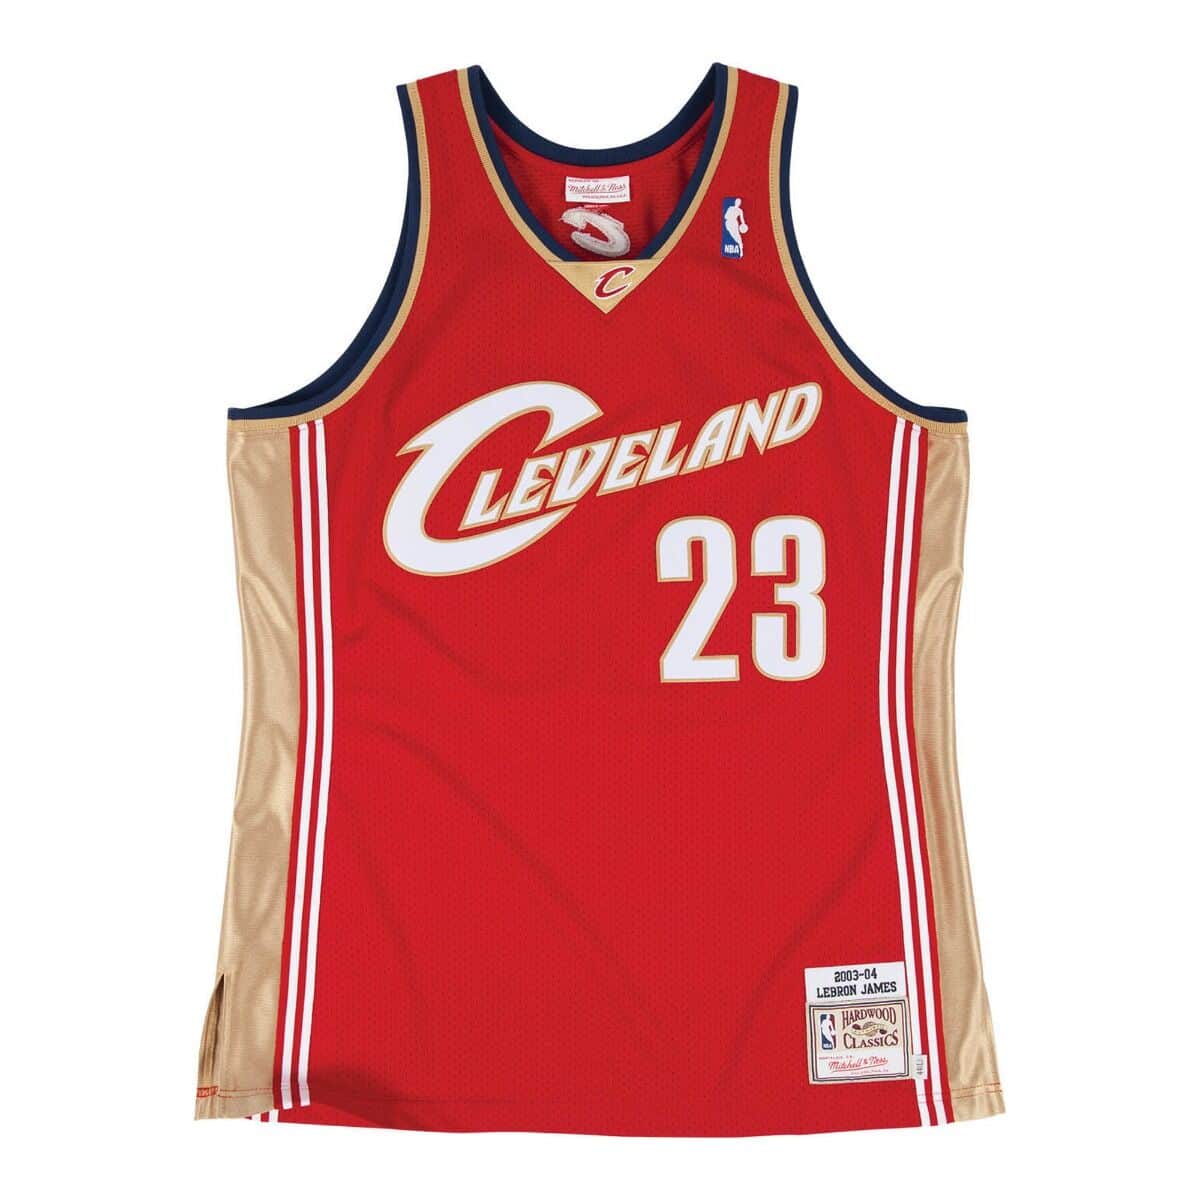 Authentic Lebron James Cleveland Cavaliers Road 2003-04 Jersey